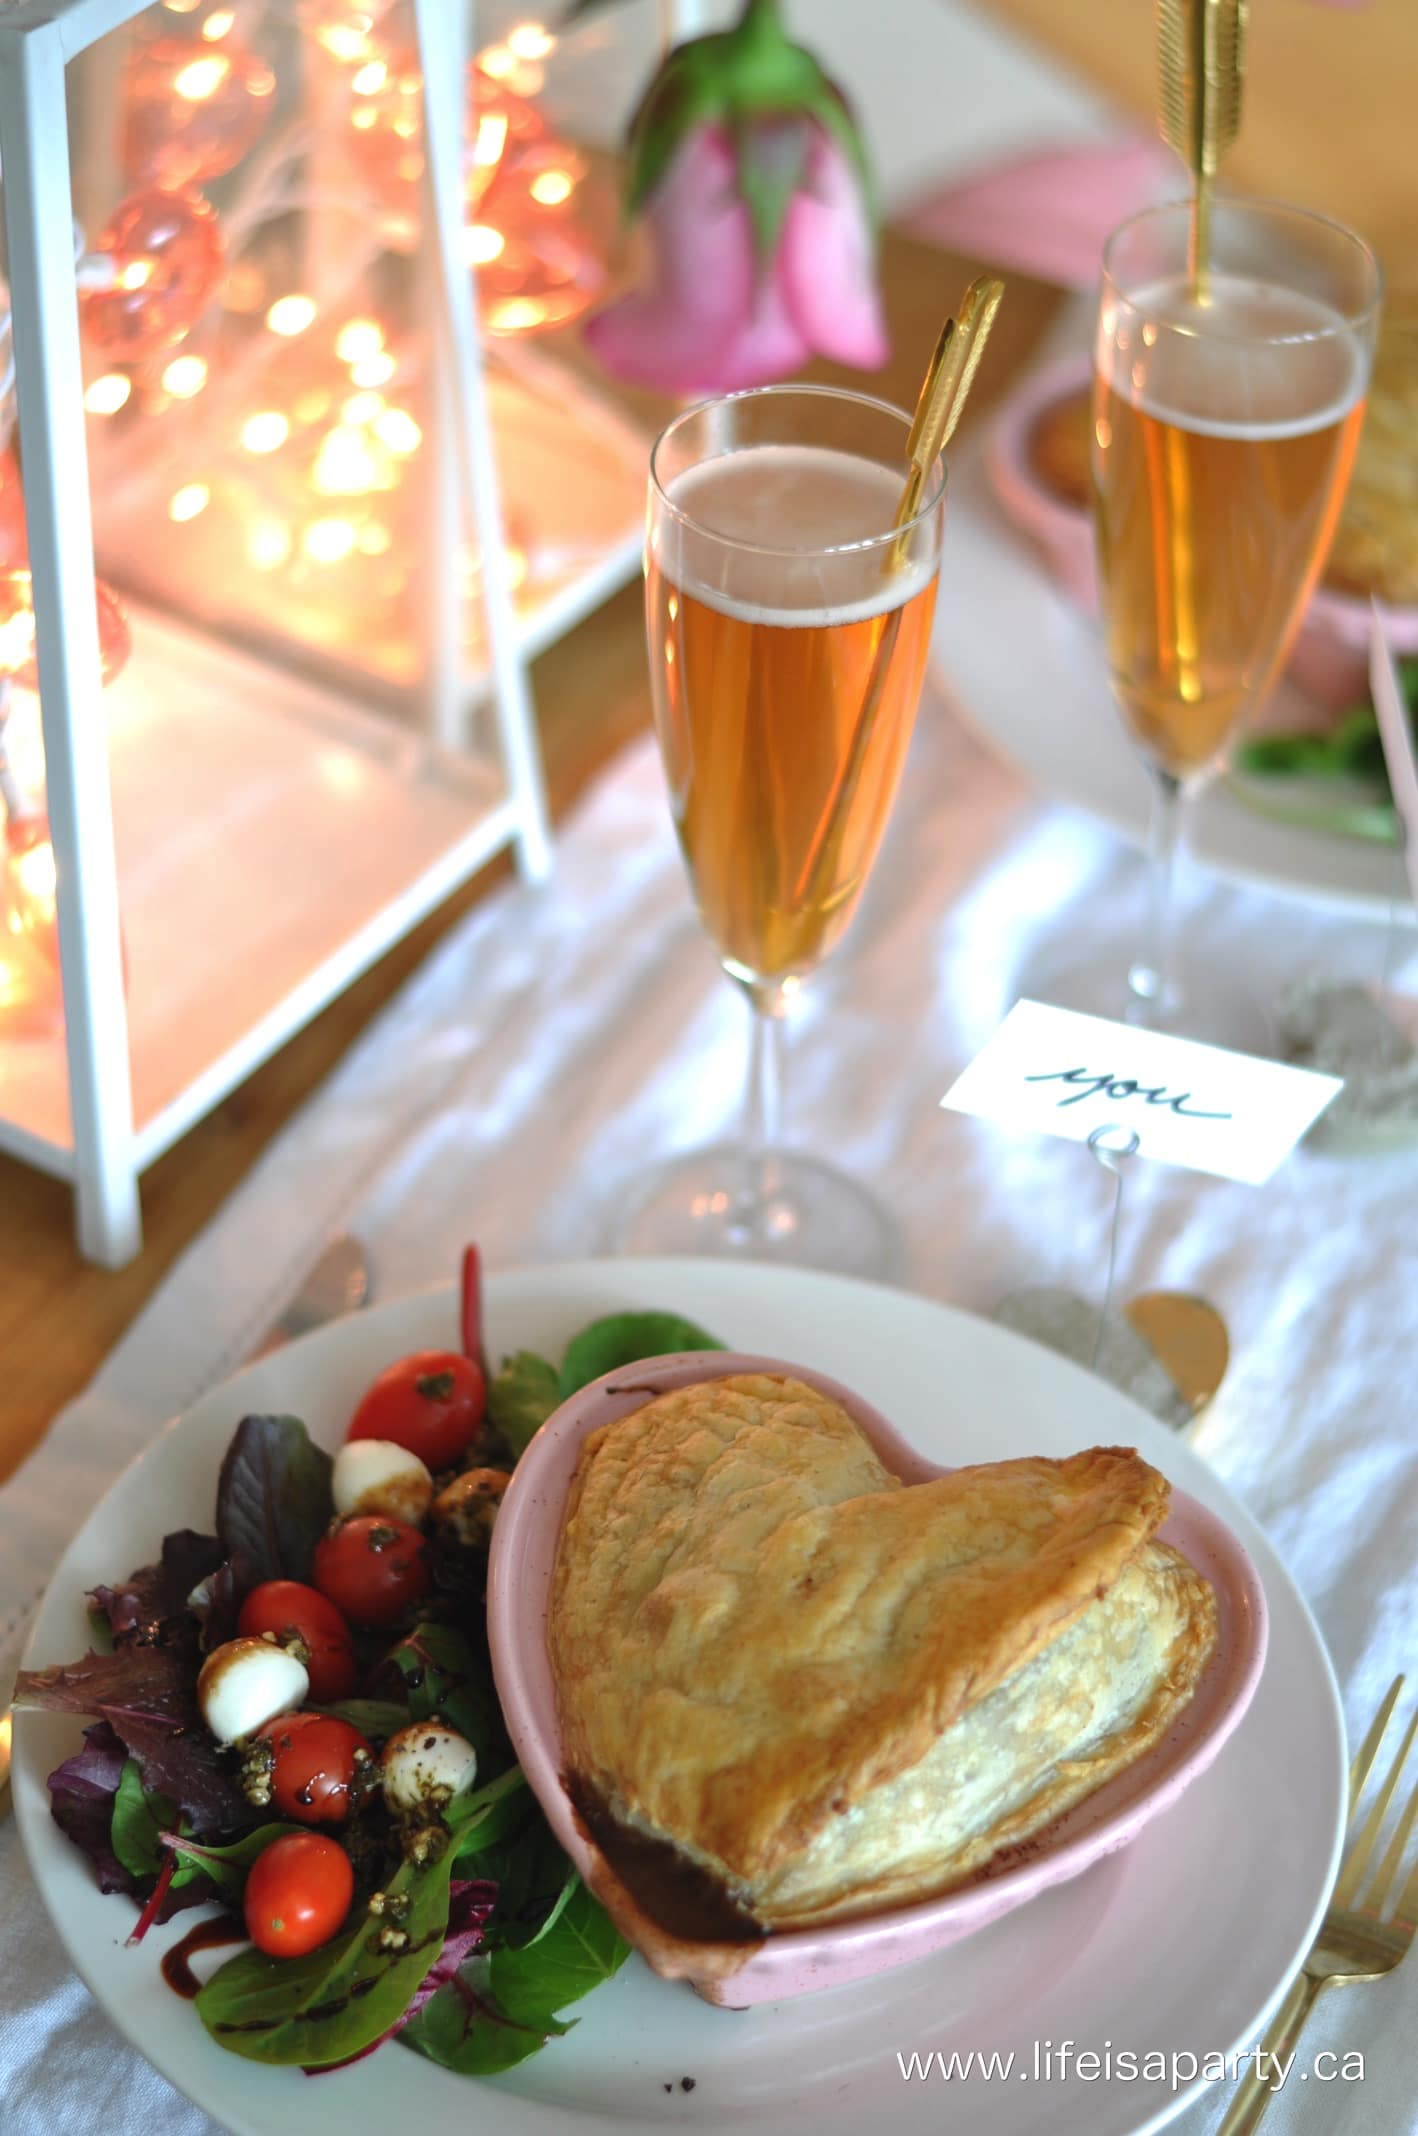 Valentine's Day Romantic Night In: Fireside romantic three-course dinner, perfect for an intimate night in.